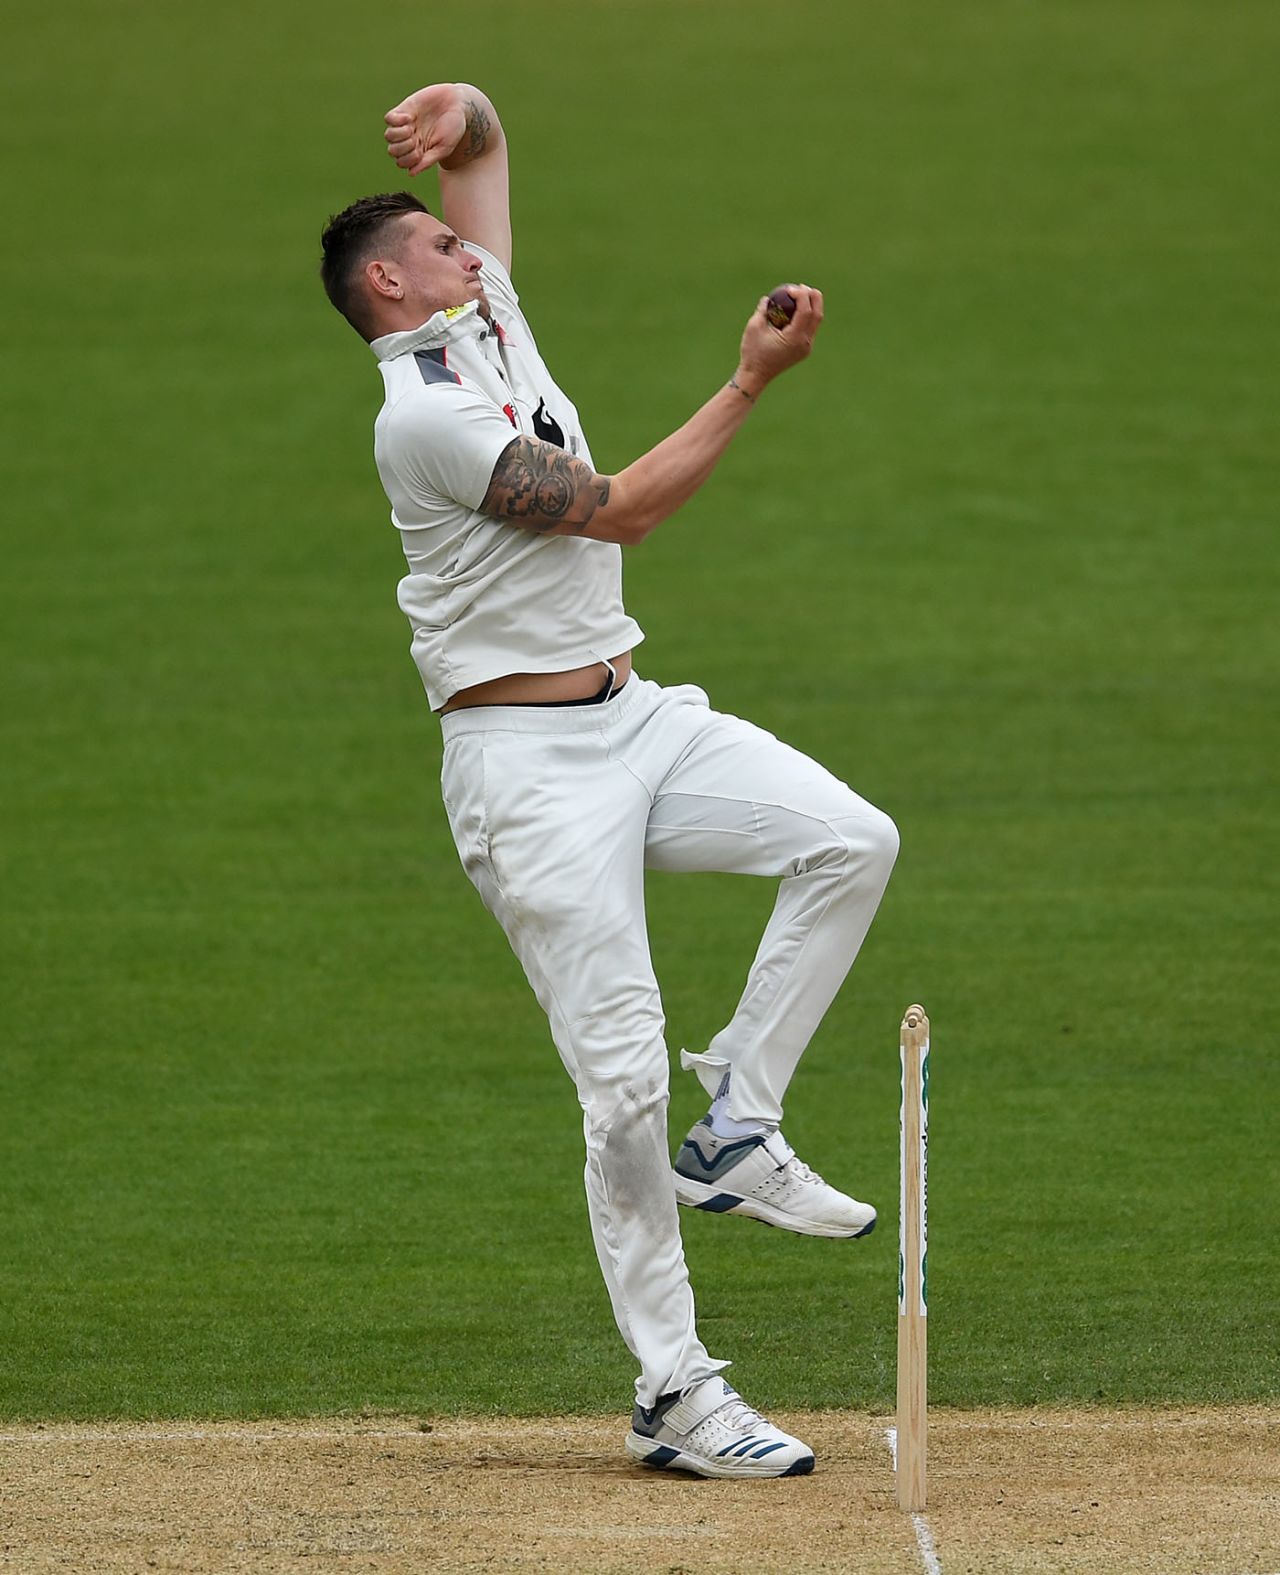 Harry Podmore arrives at the crease, Warwickshire v Kent, County Championship, Division One, Edgbaston, 2nd day, April 12, 2019